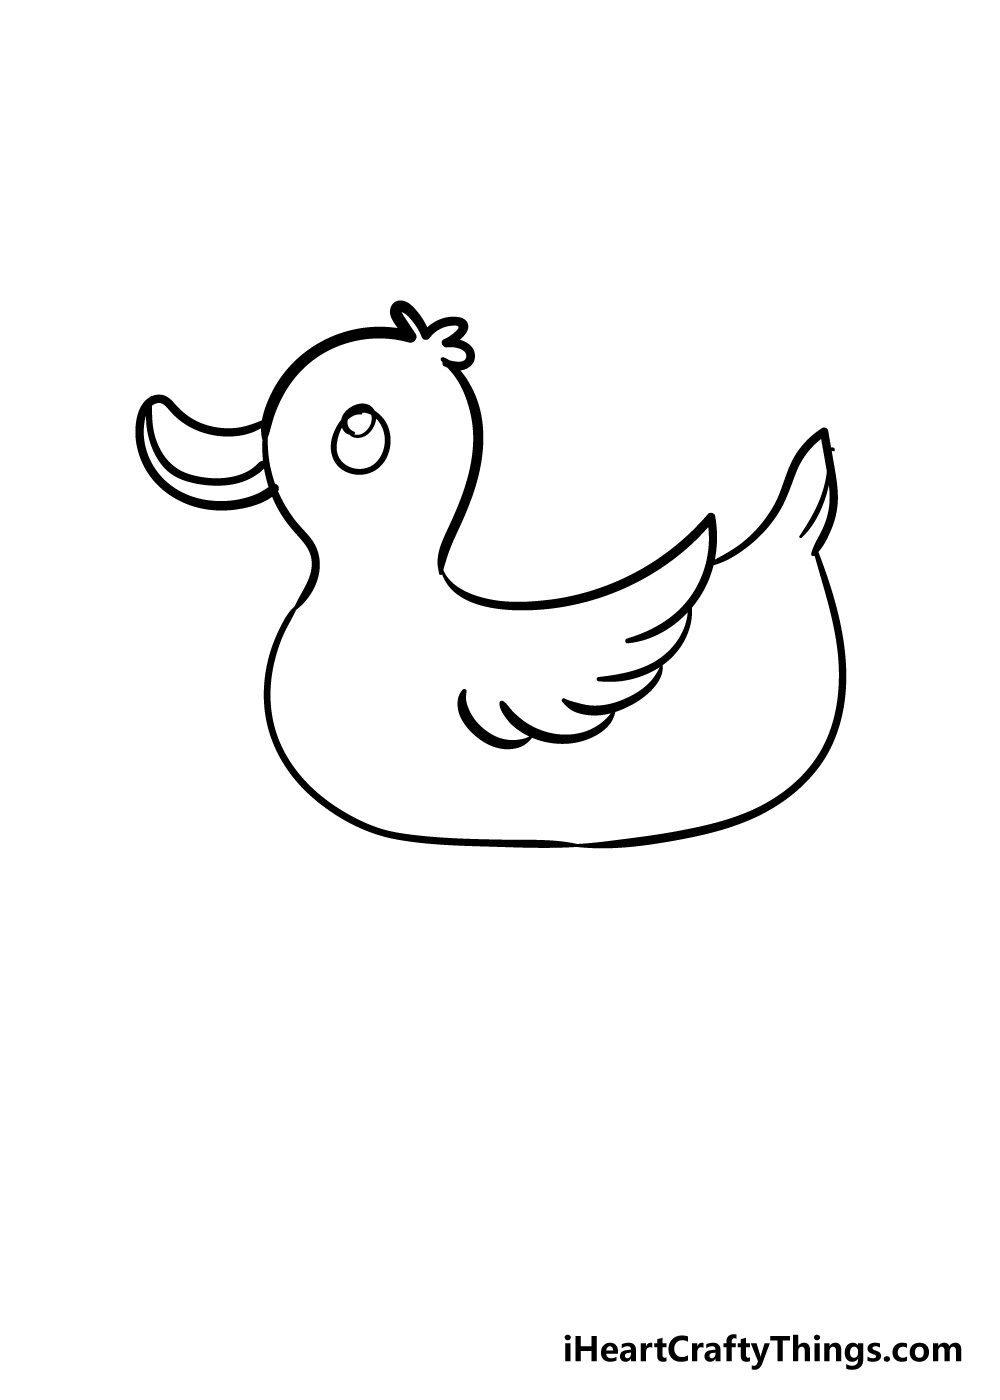 How to Draw a Duck - Really Easy Drawing Tutorial